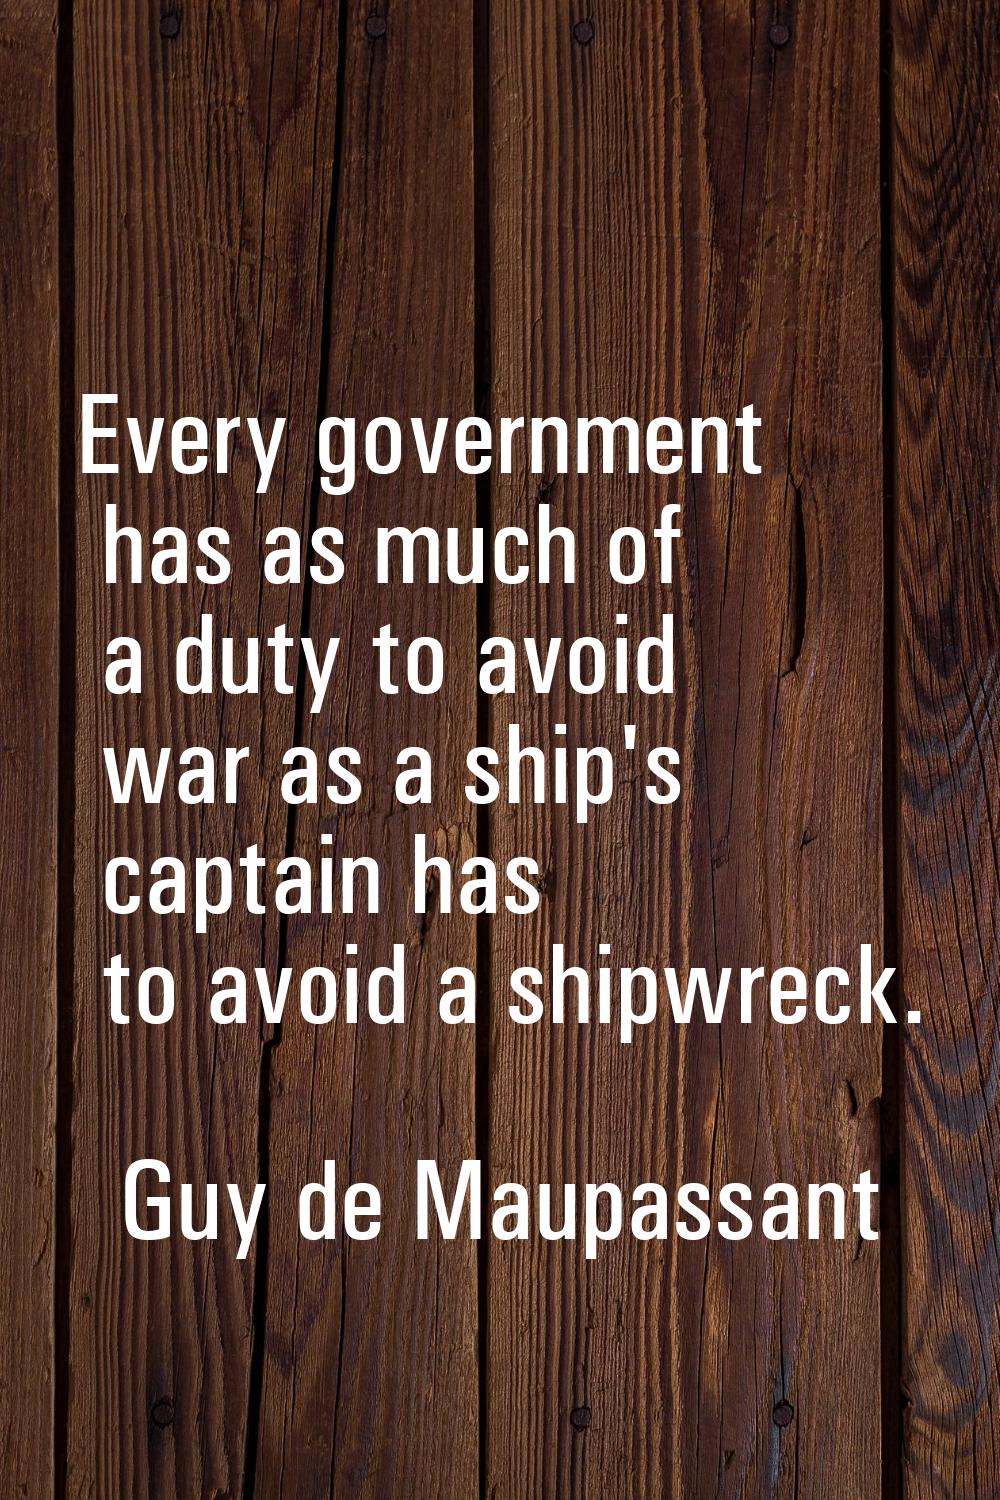 Every government has as much of a duty to avoid war as a ship's captain has to avoid a shipwreck.